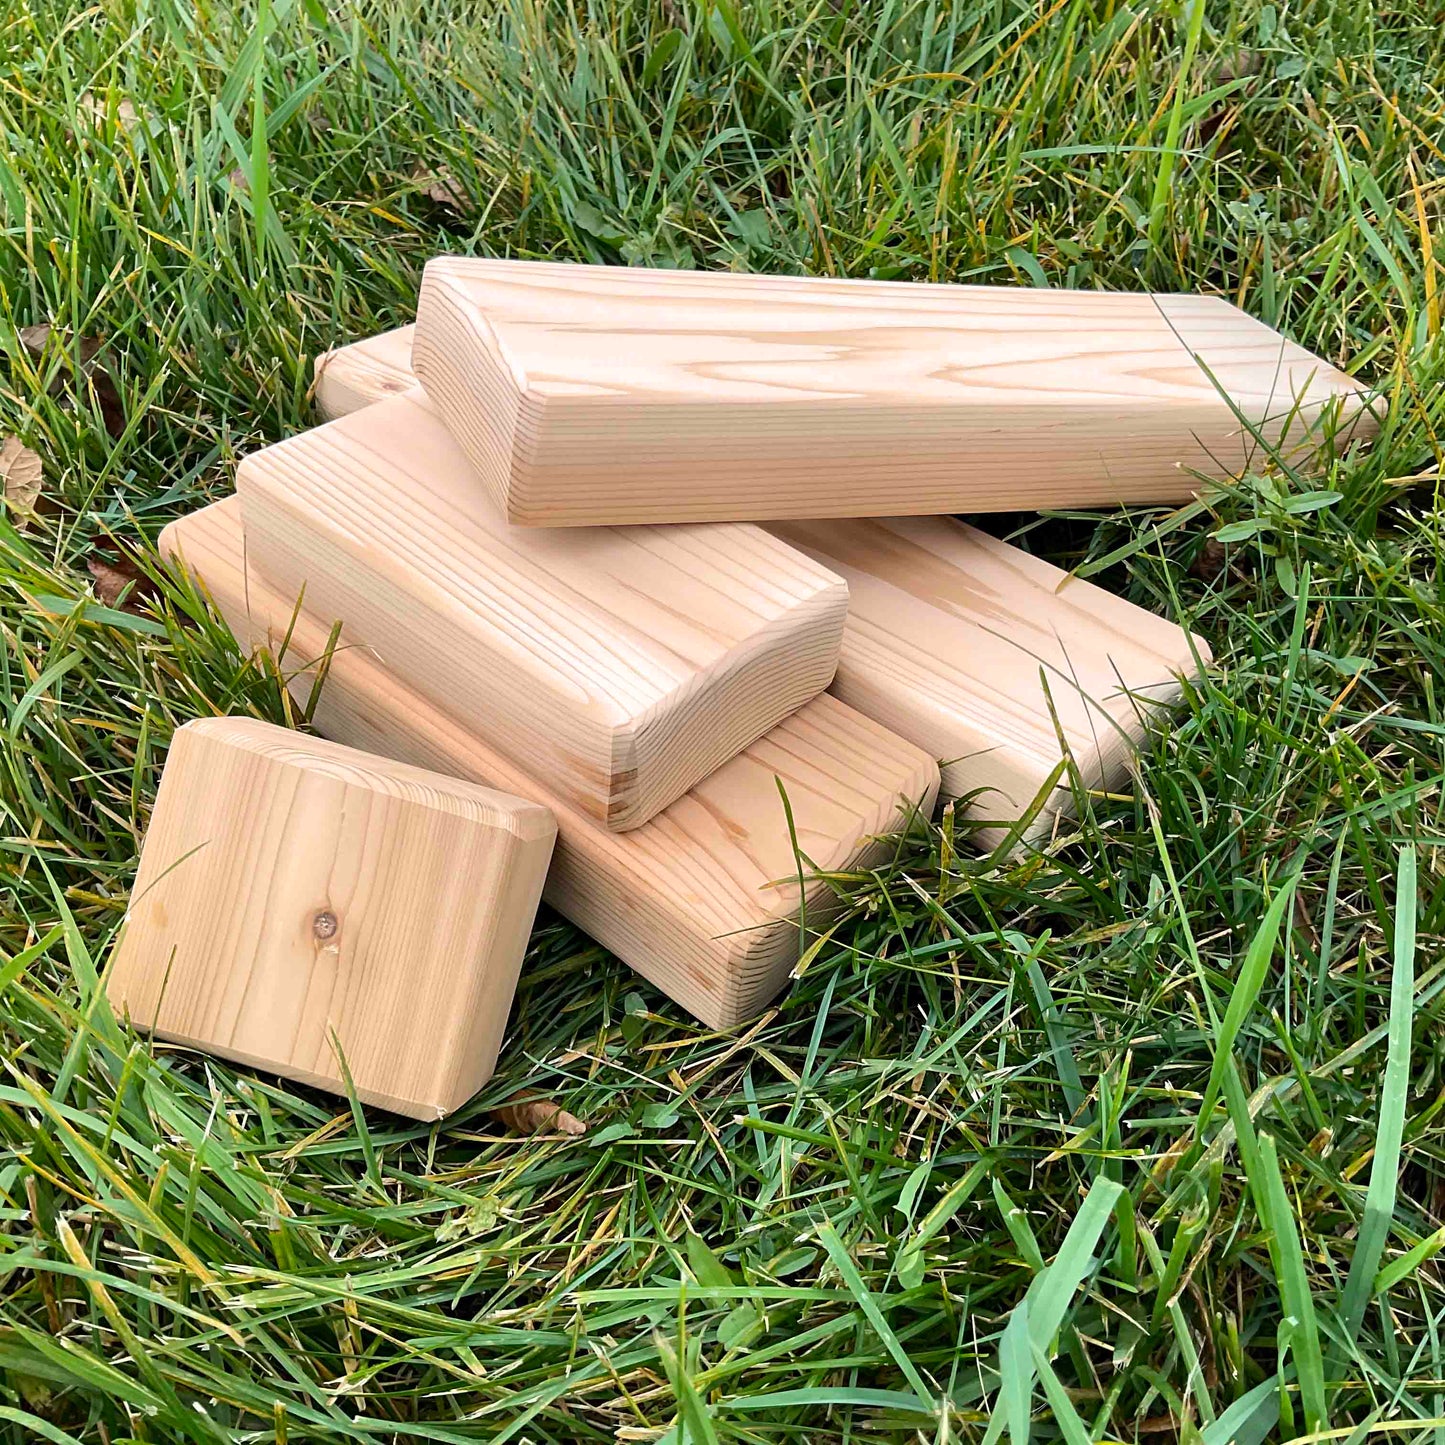 Large Cedar Blocks (16pcs) - Just Playing (Made in Canada)